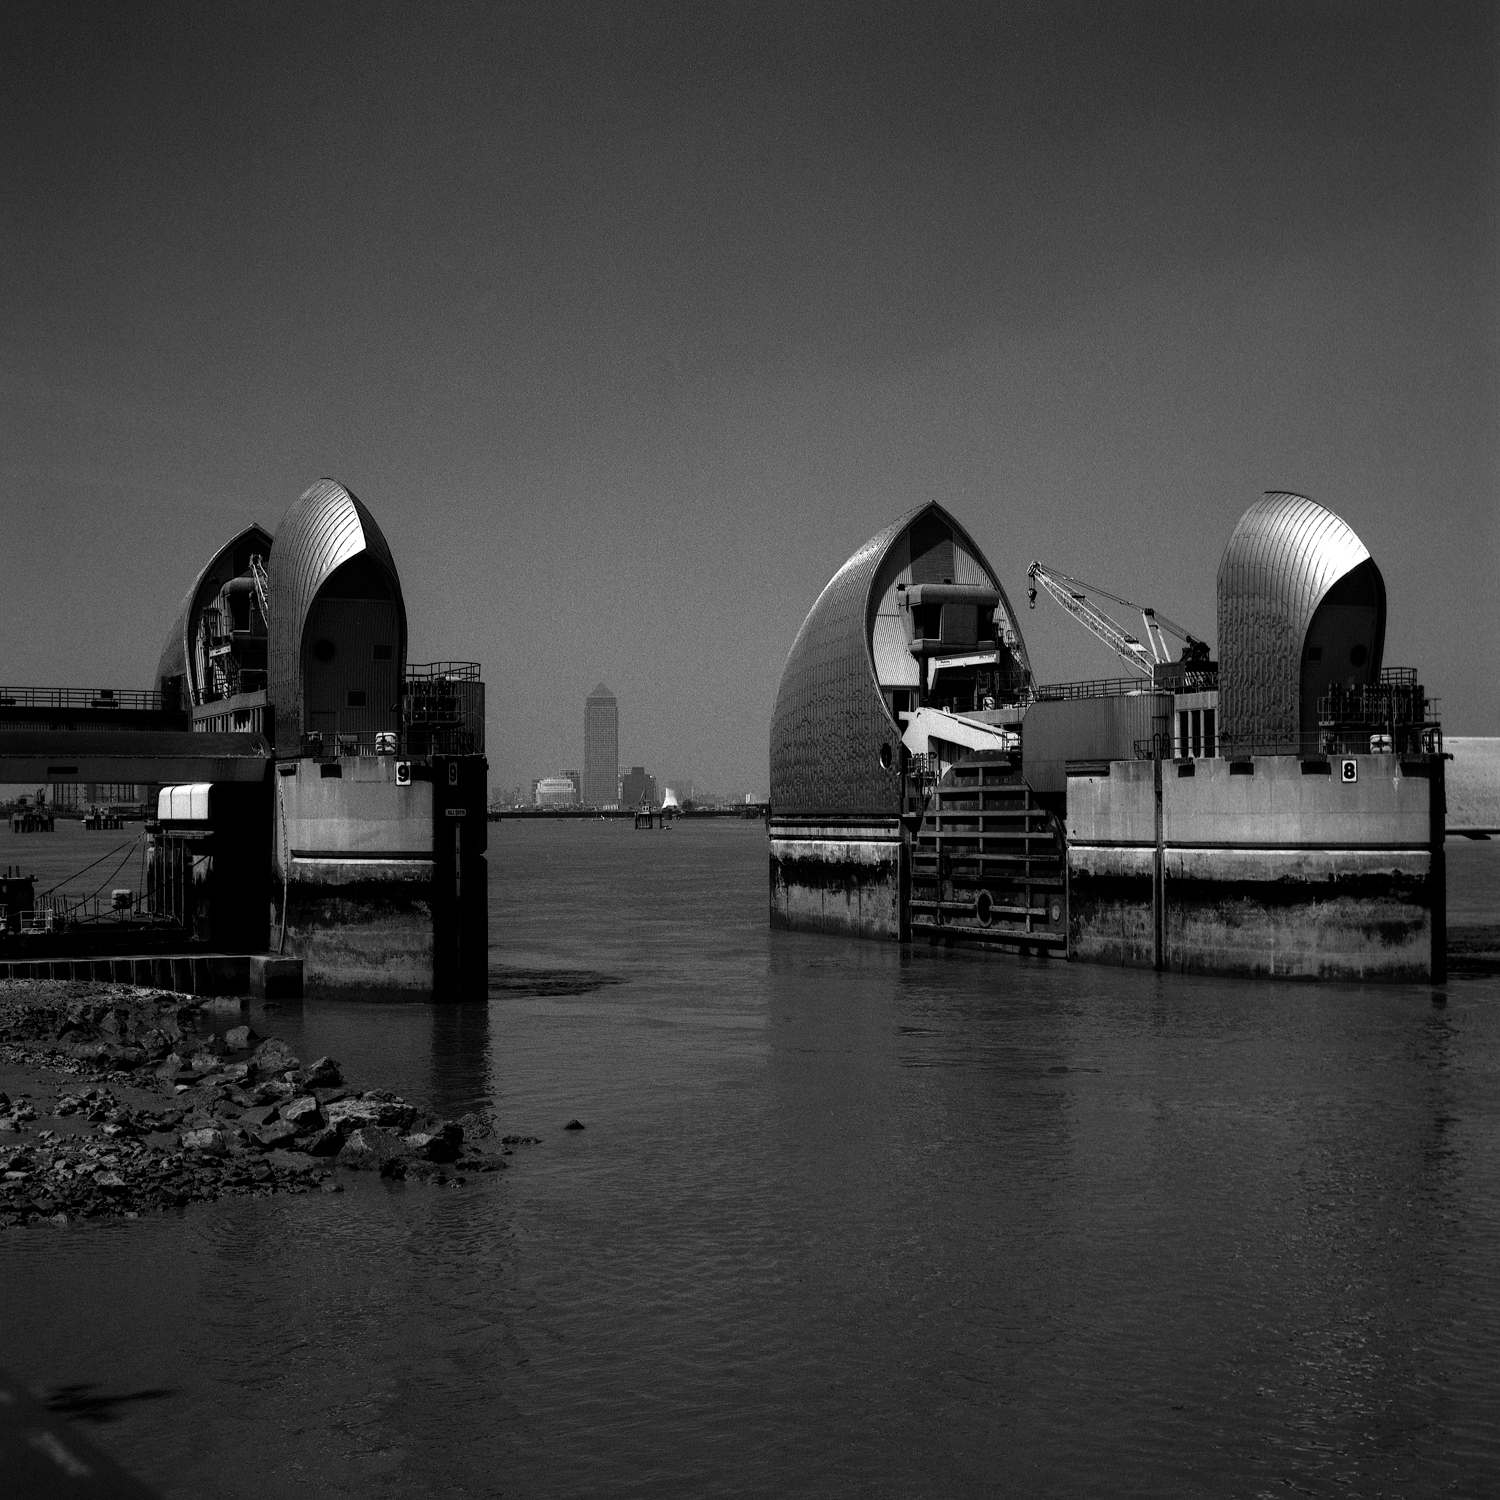 SWC Early Days Thames Barrier Date Created 17-07-97